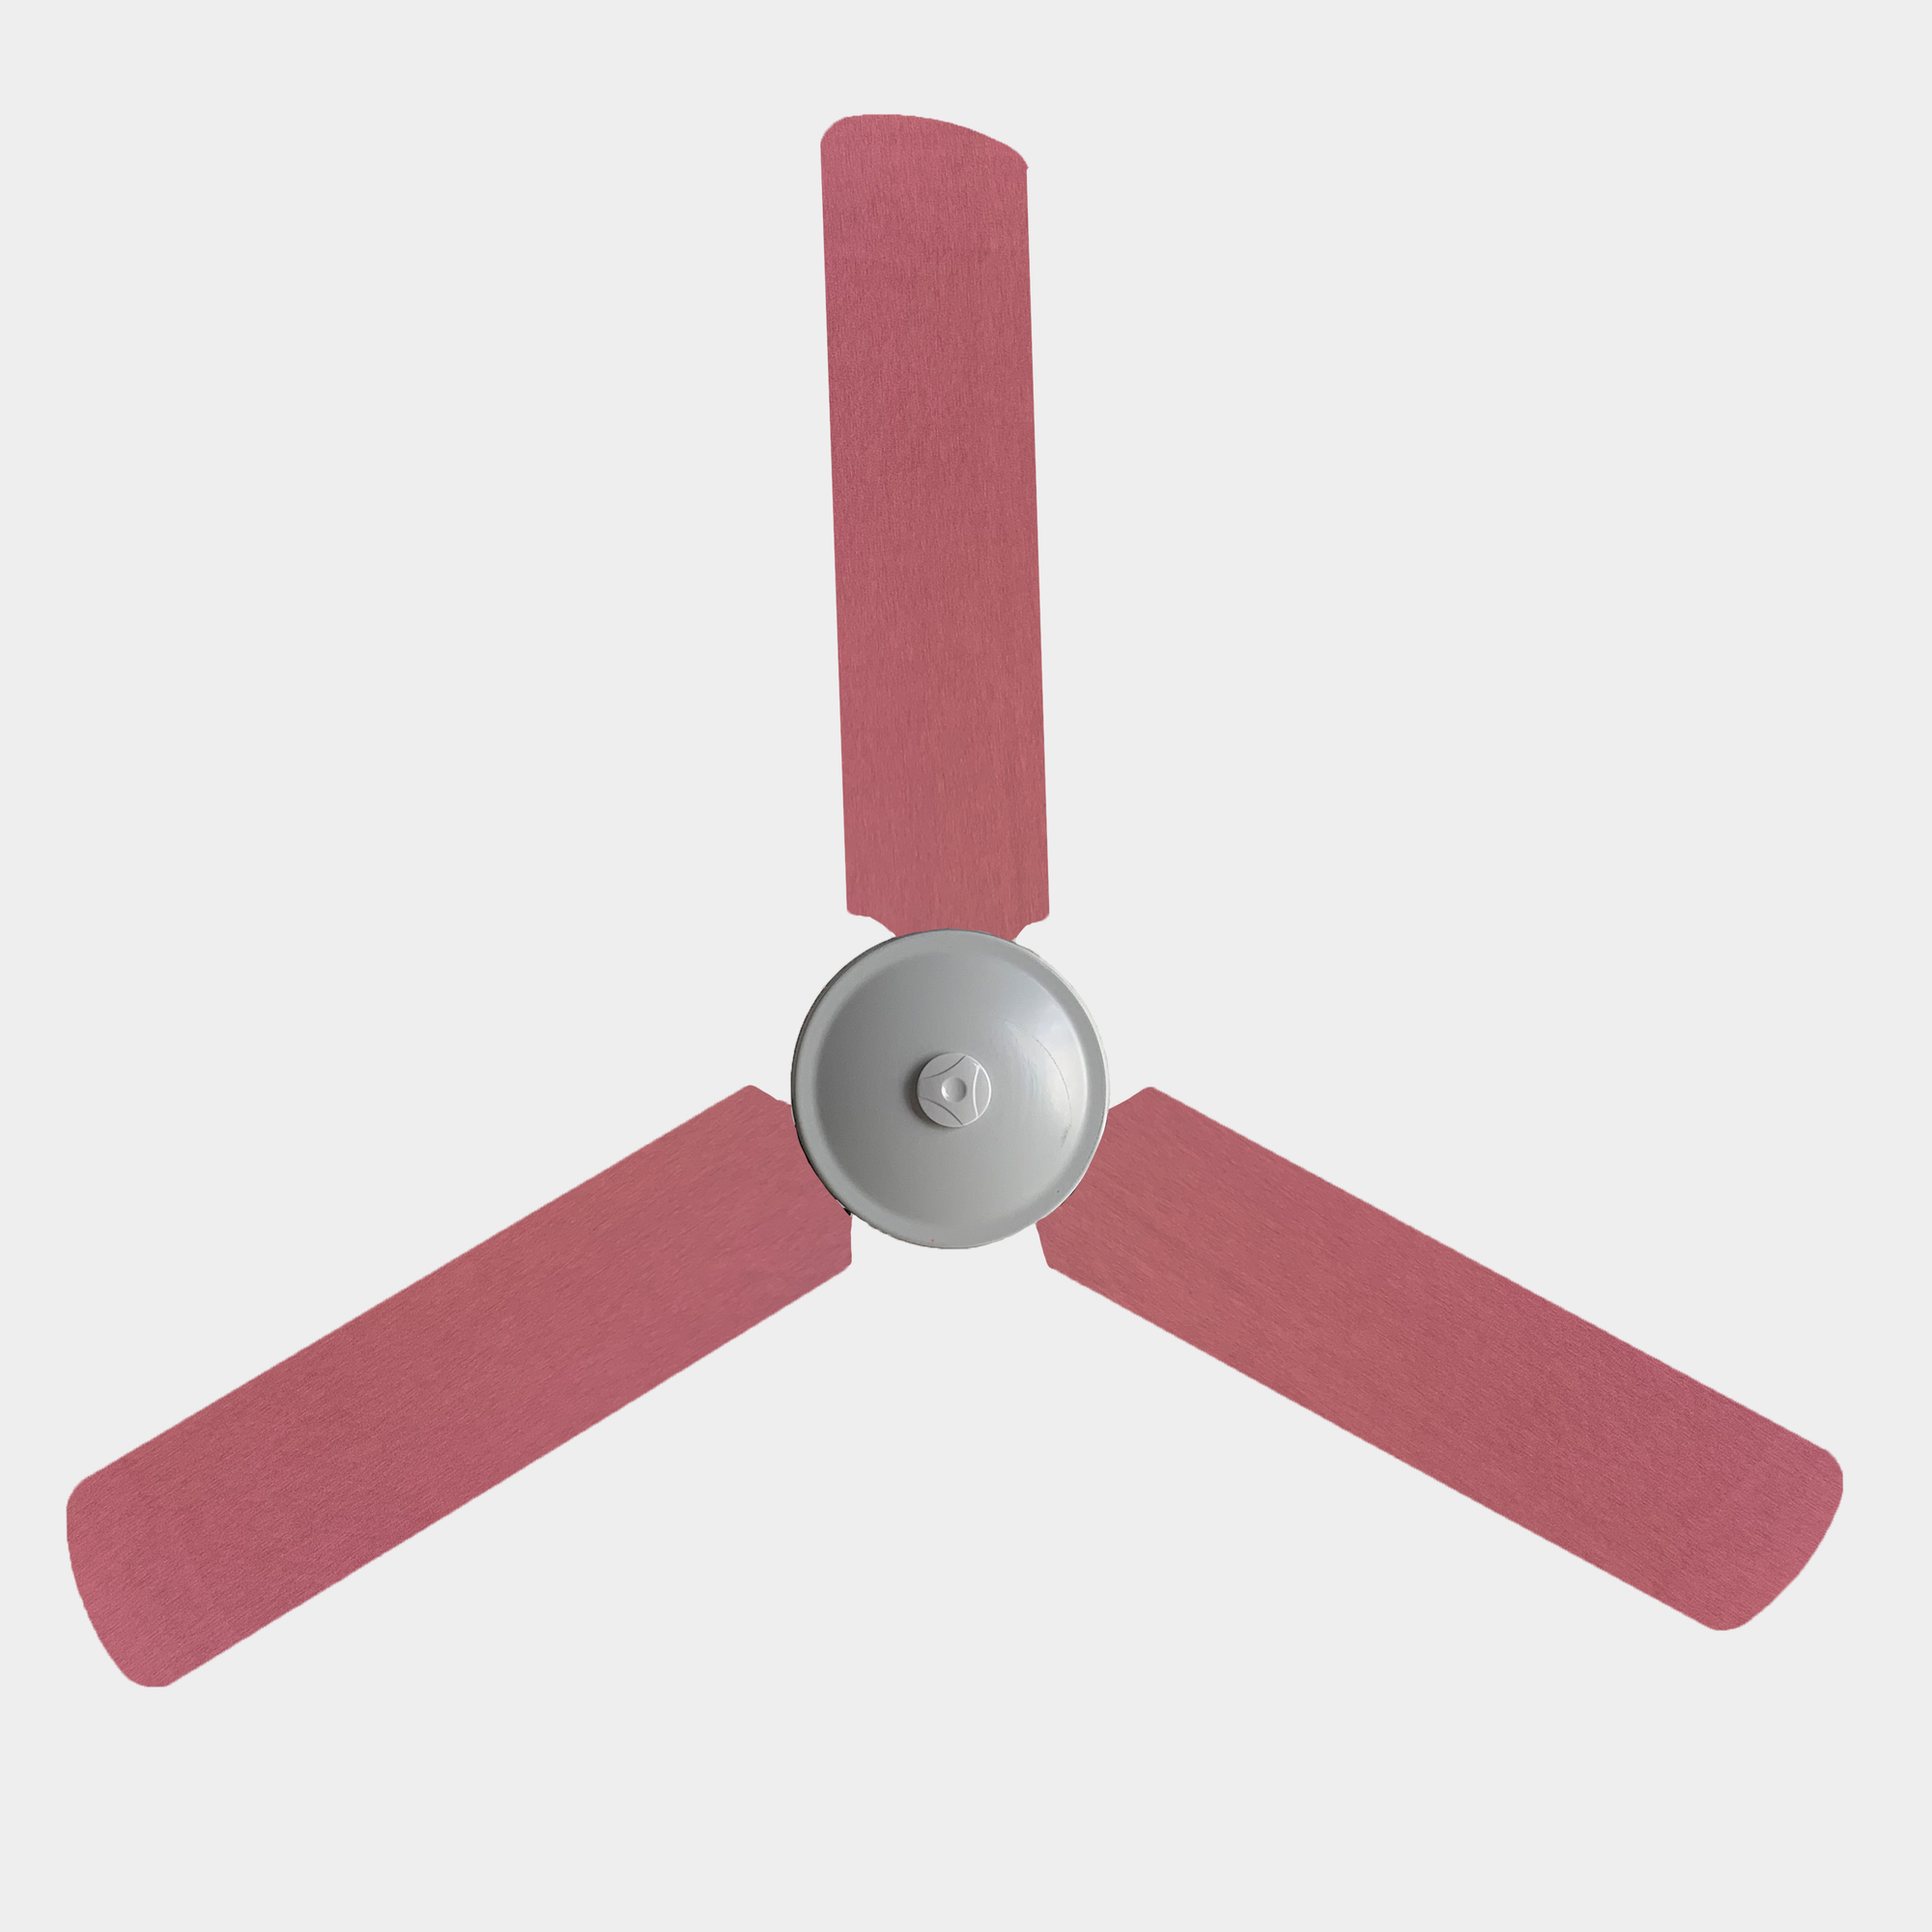 Pink blush fan blade covers on a three bladed ceiling fan